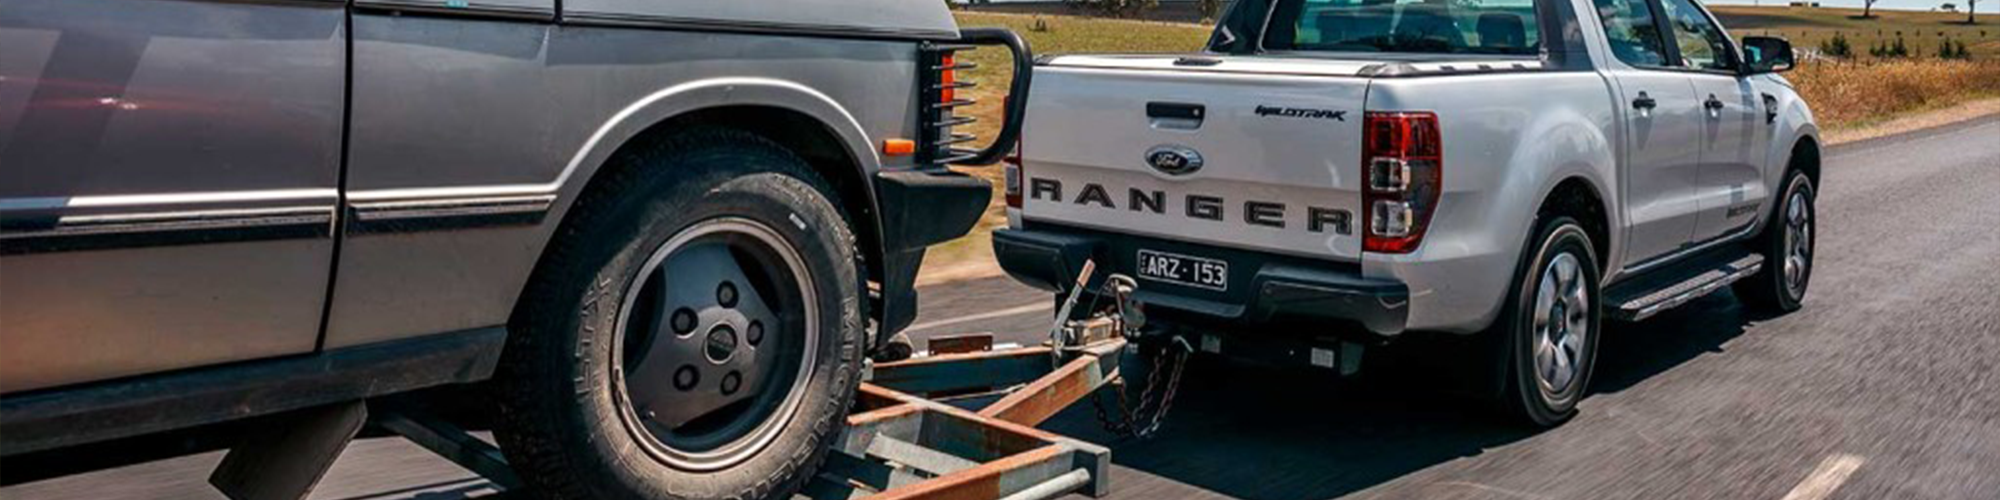 Ford Ranger - Towing a Trailer